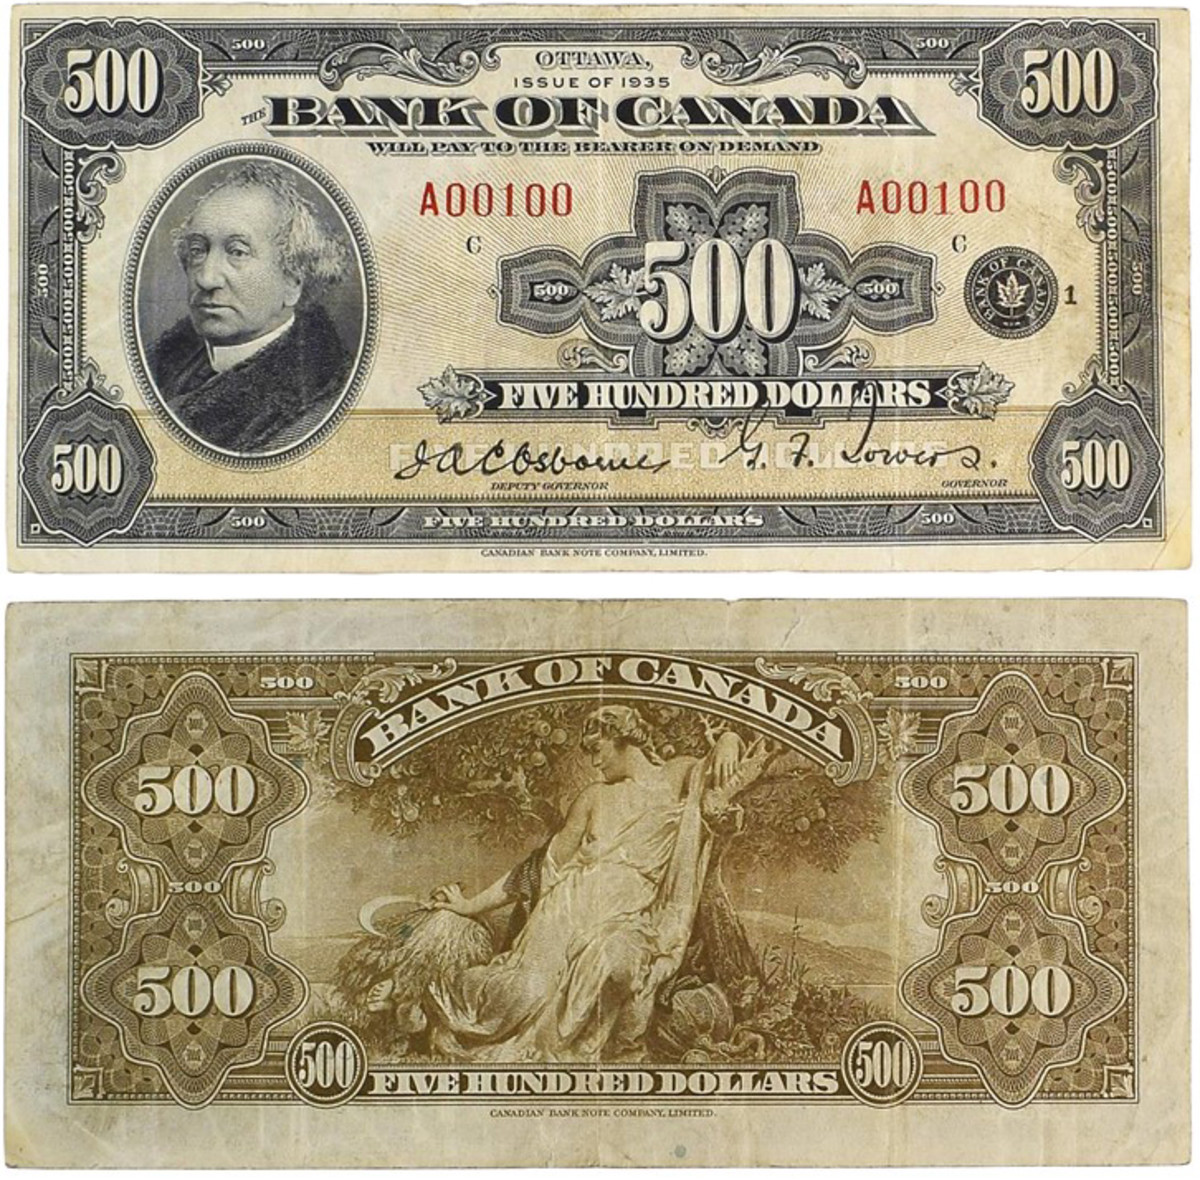 Canada, Bank of Canada 1935 500 Dollars graded PMG 20 Very Fine